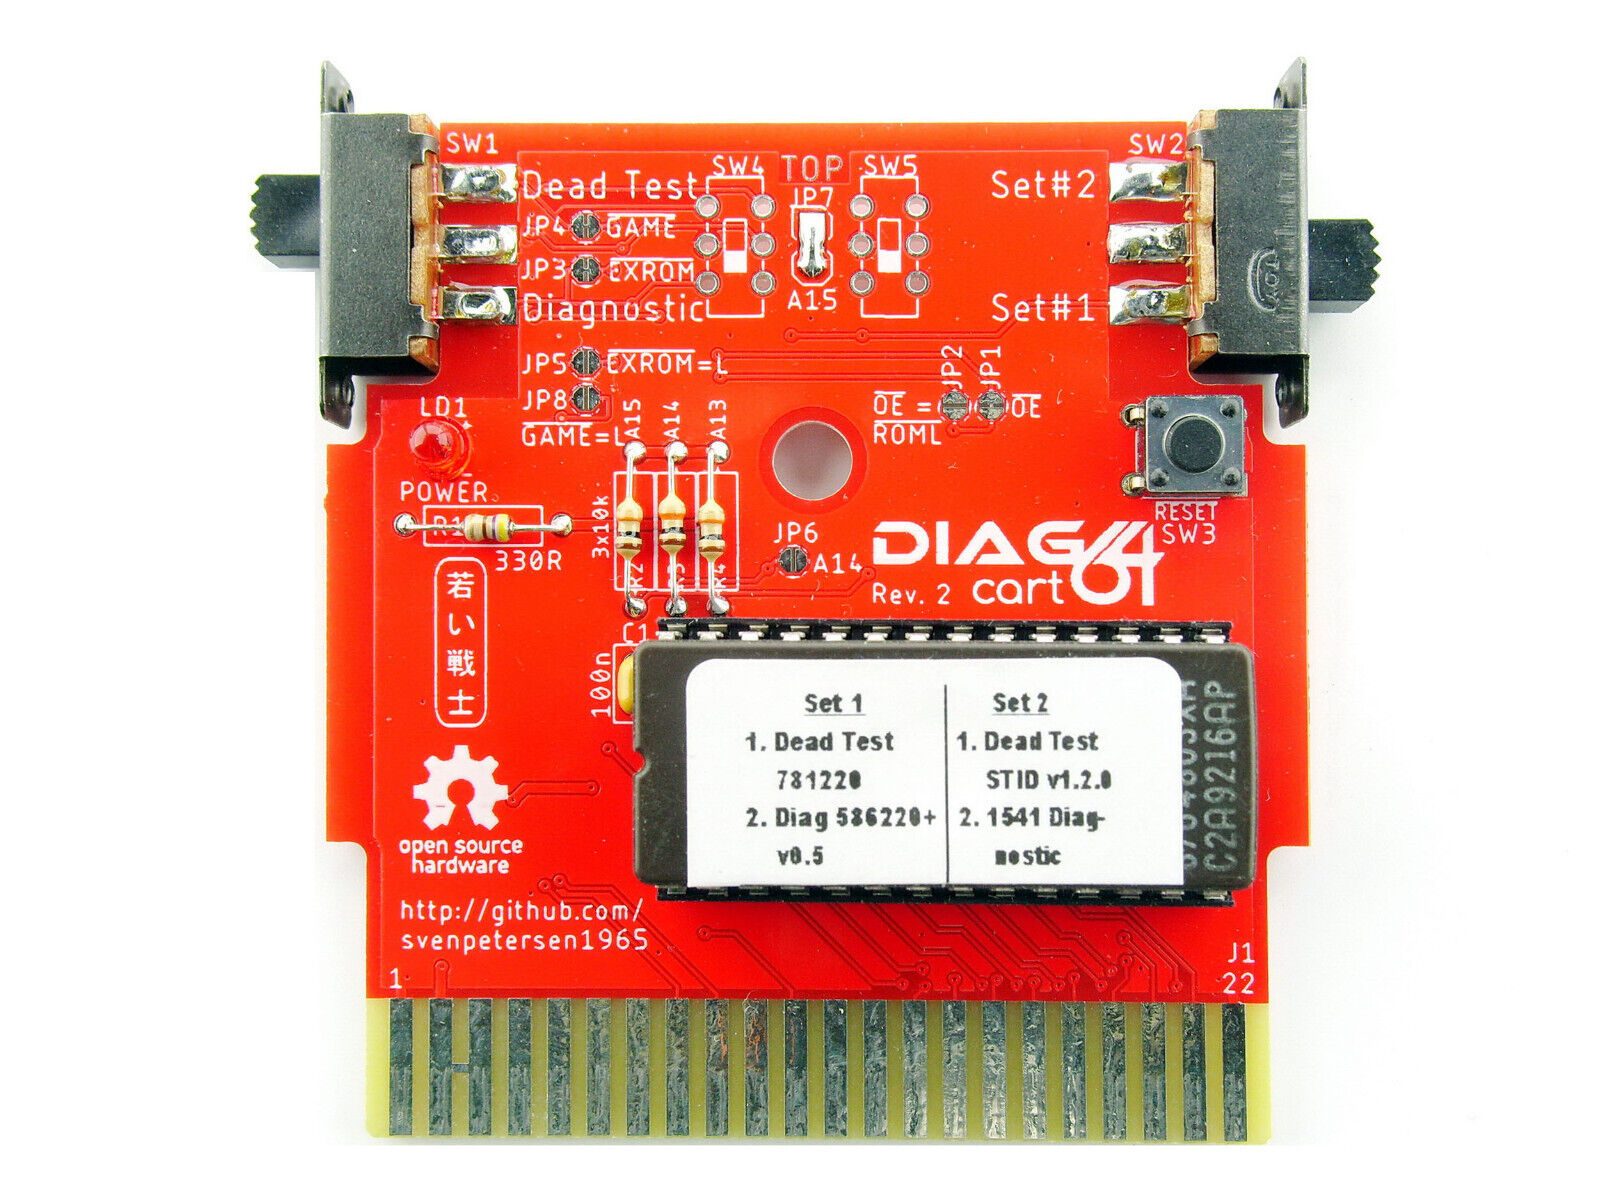 Diag 64 Cart - 4in1 Diagnostic Cartridge for Commodore 64, Assembled and Tested